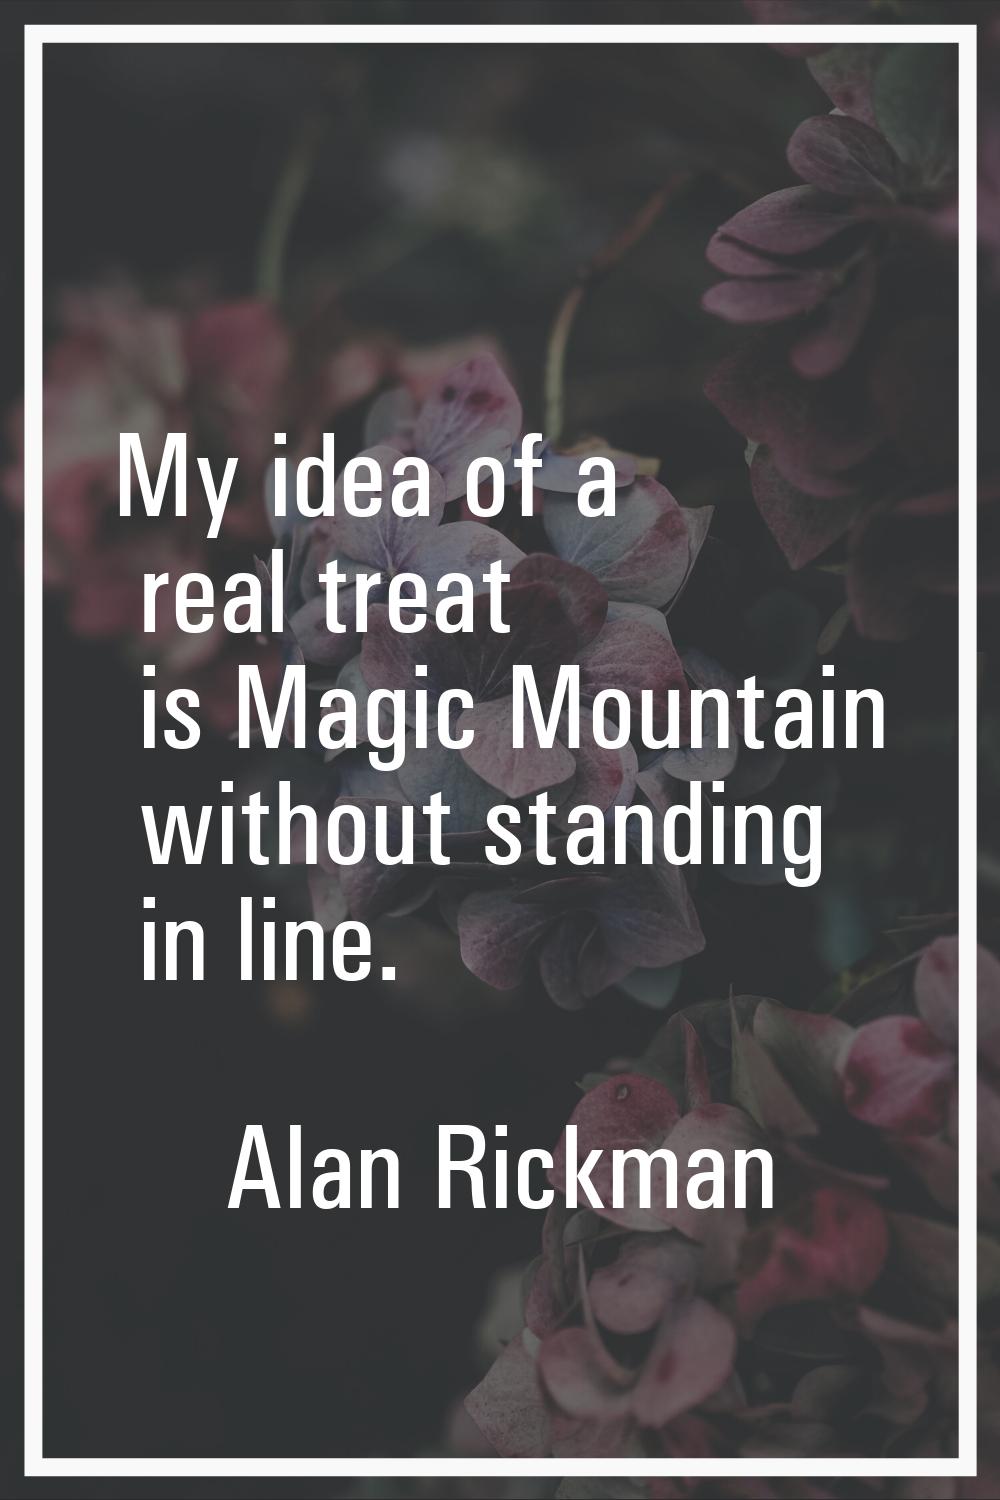 My idea of a real treat is Magic Mountain without standing in line.